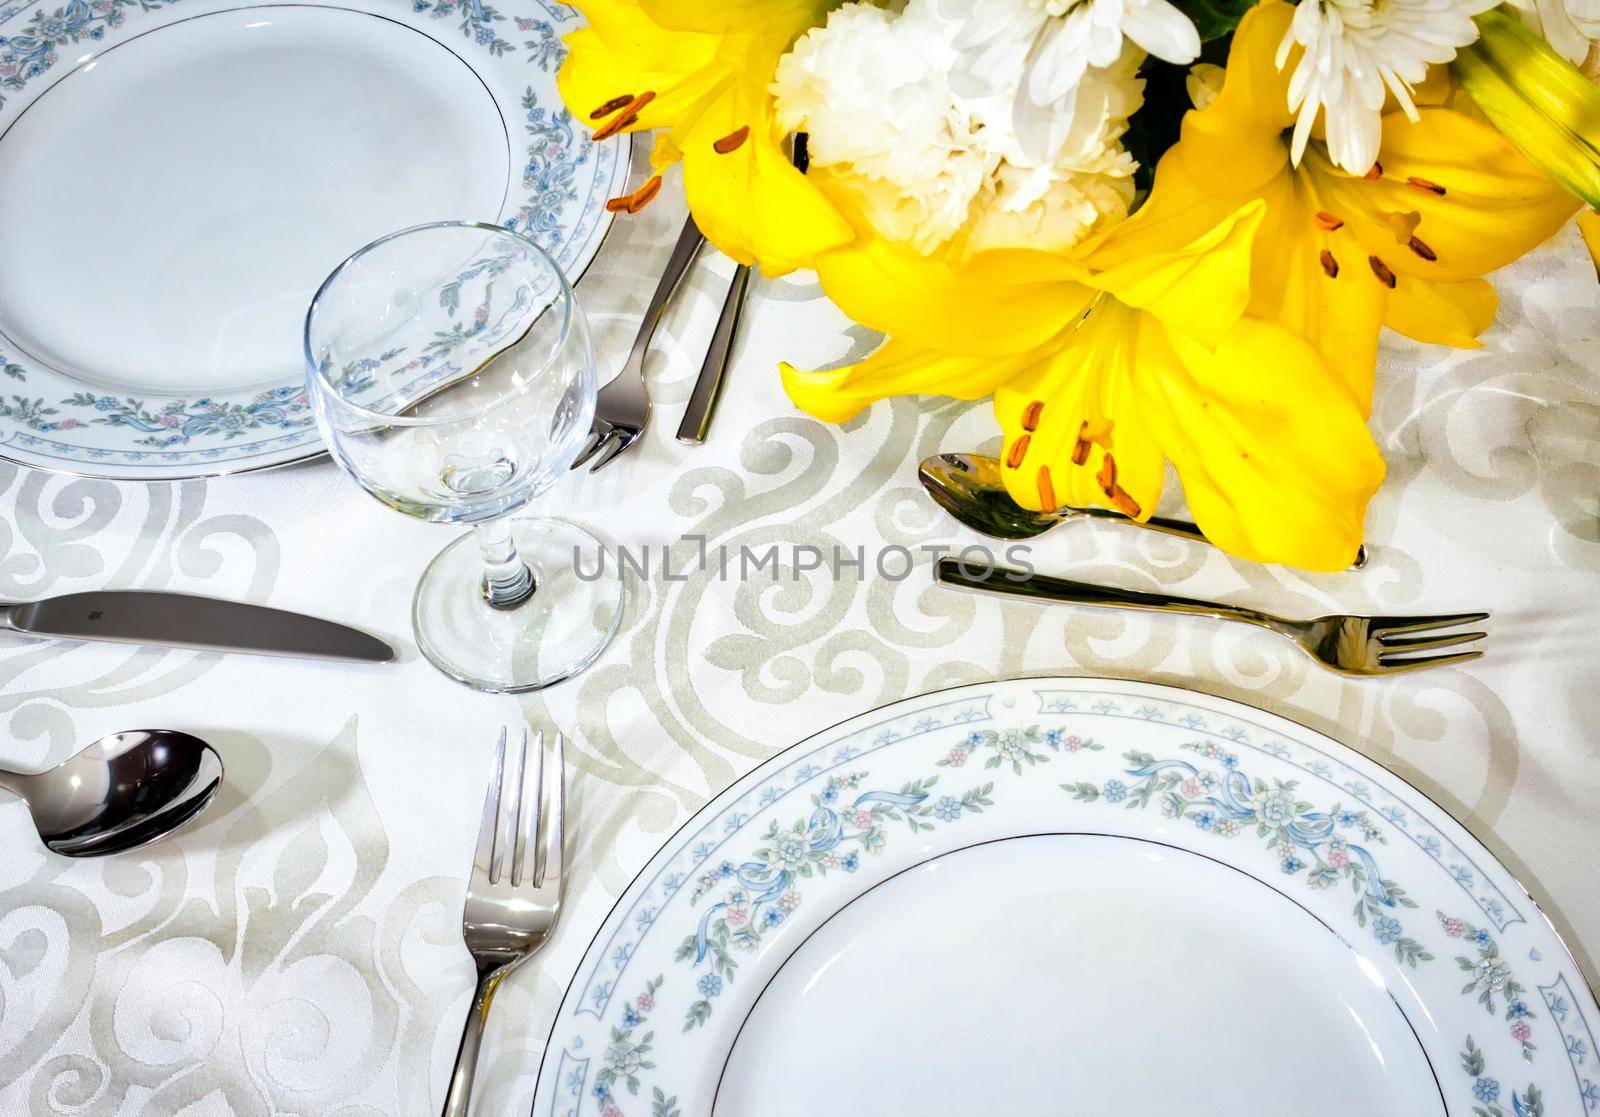 Elegant dining set for a romantic meal on a white tablecloth in a fancy restaurant with arranged flowers in a vase on the table by tennesseewitney